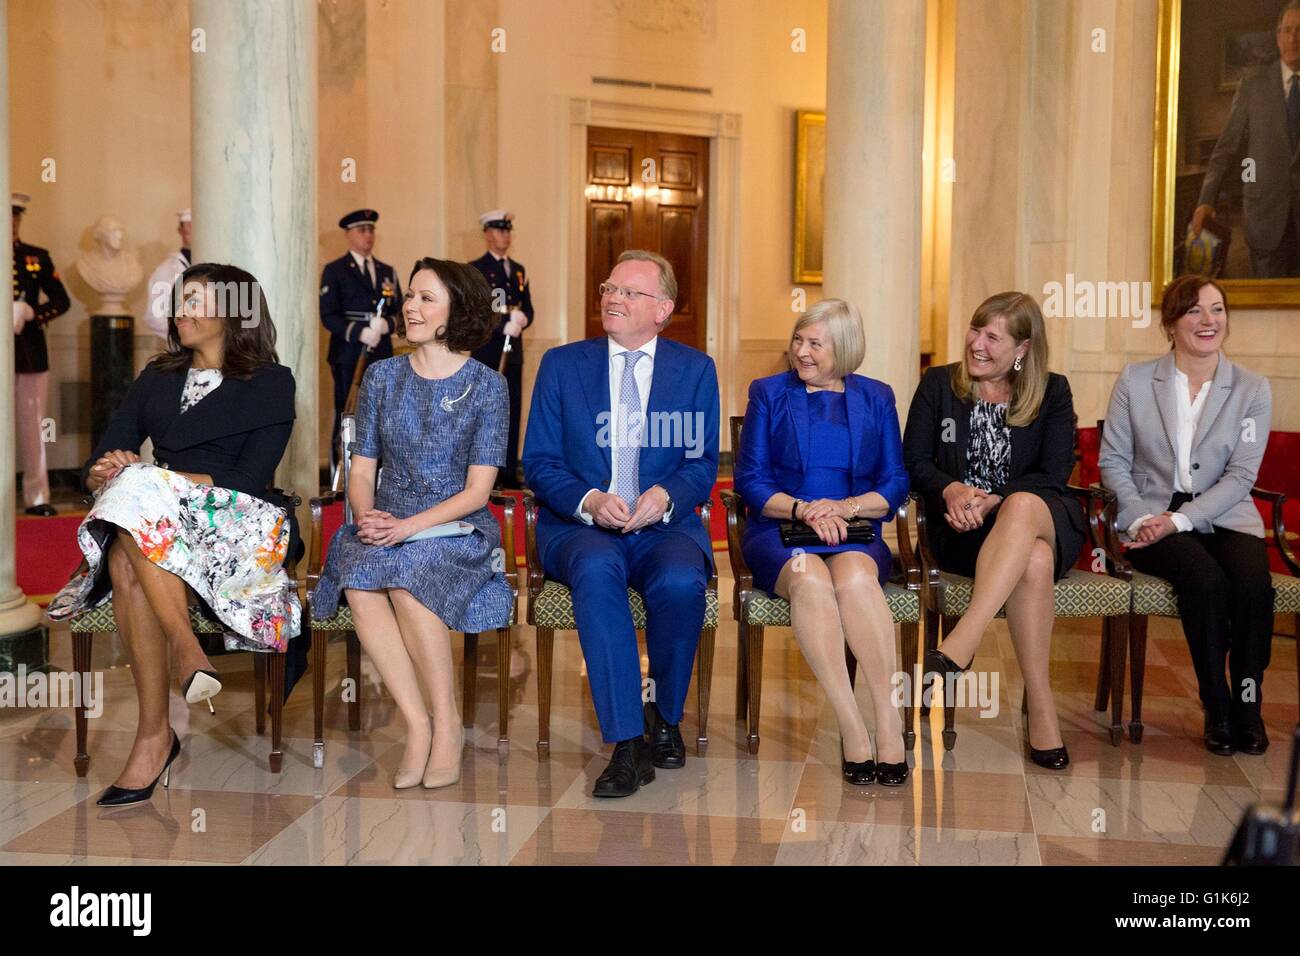 U.S First Lady Michelle Obama and the spouses of the Nordic leaders react to remarks by President Barack Obama during the arrival ceremony in the Grand Foyer of the White House May 13, 2016 in Washington, DC. Stock Photo